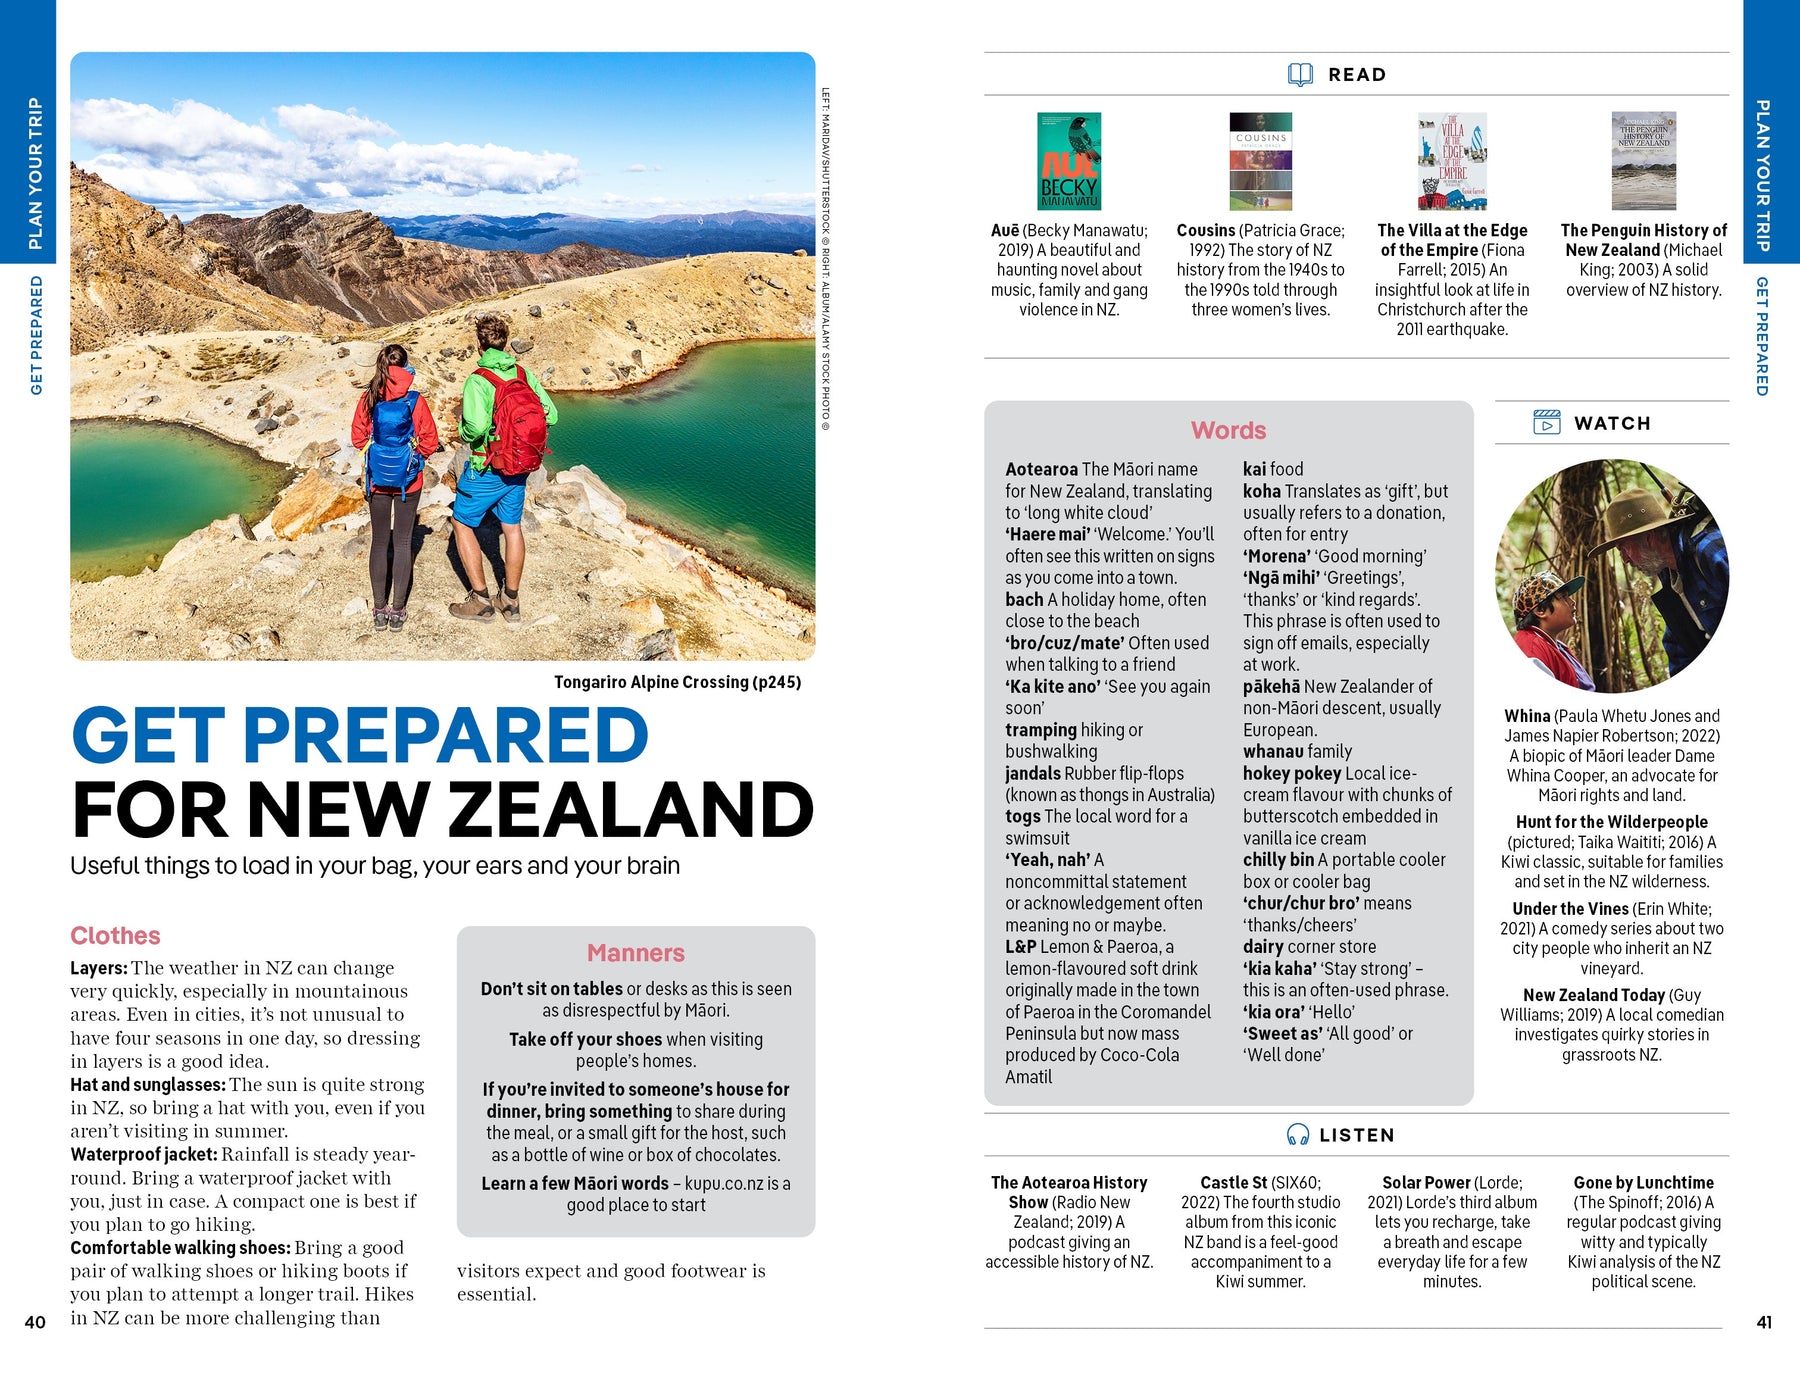 New Zealand preview